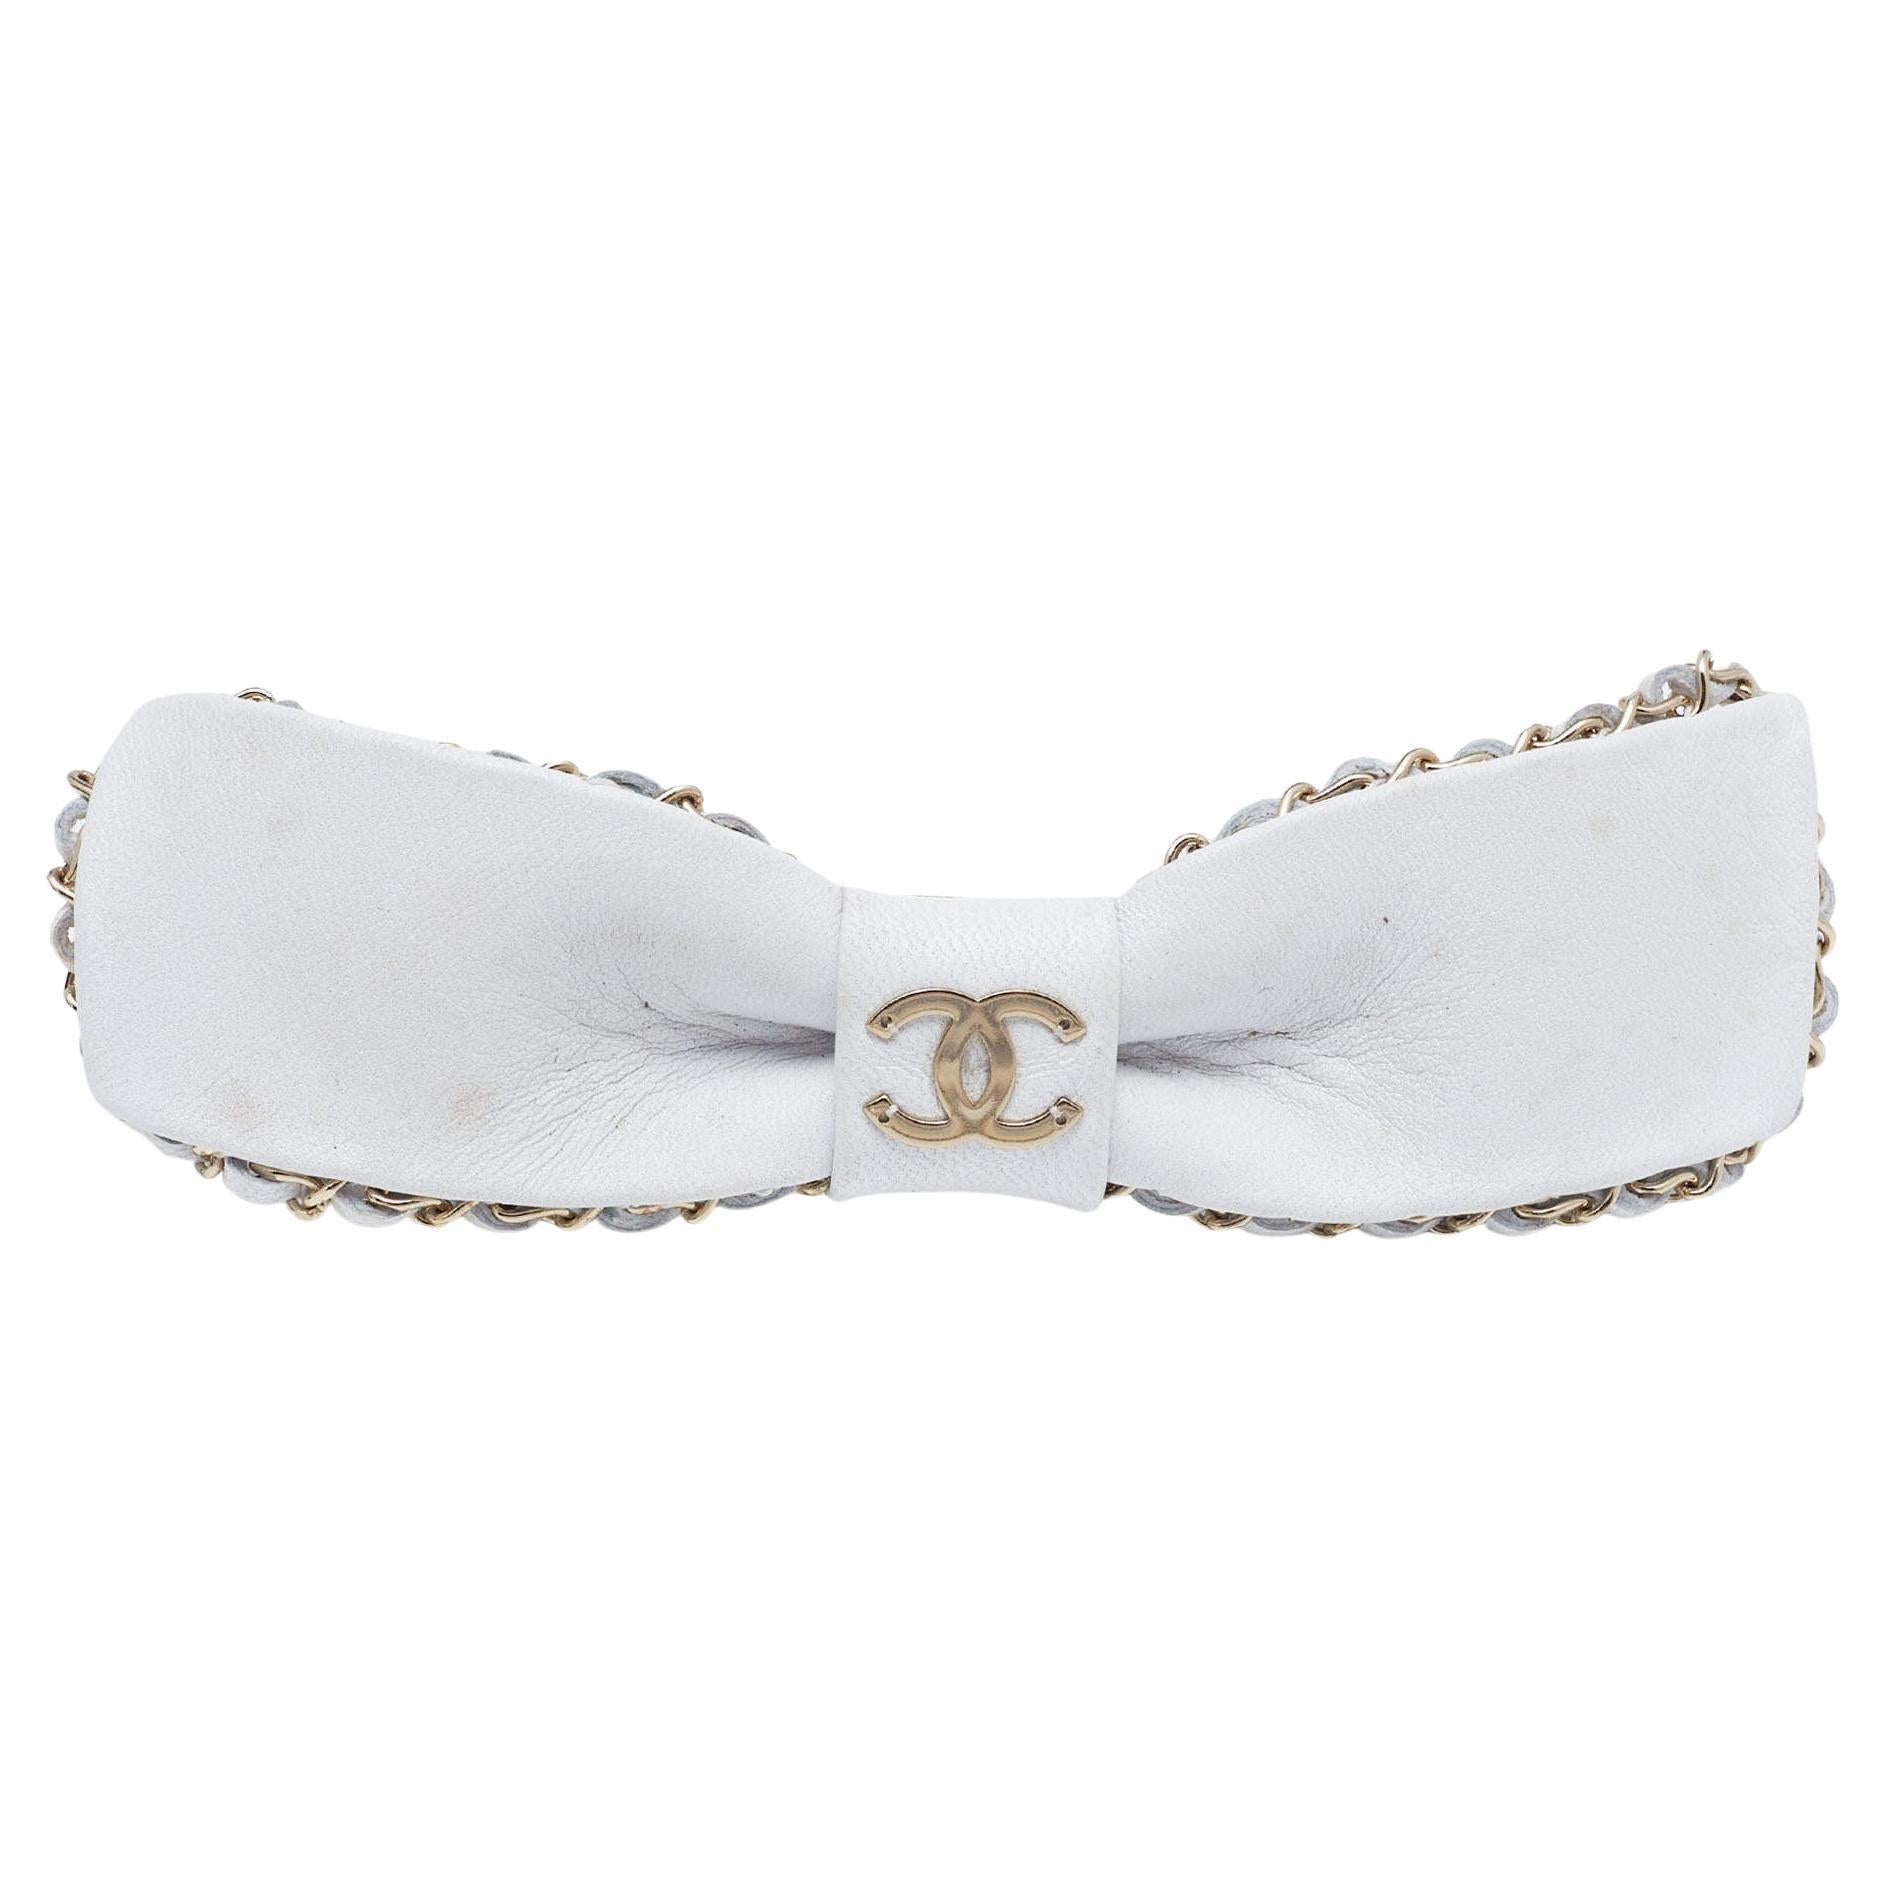 Chanel Barrette Hair Clip - 4 For Sale on 1stDibs